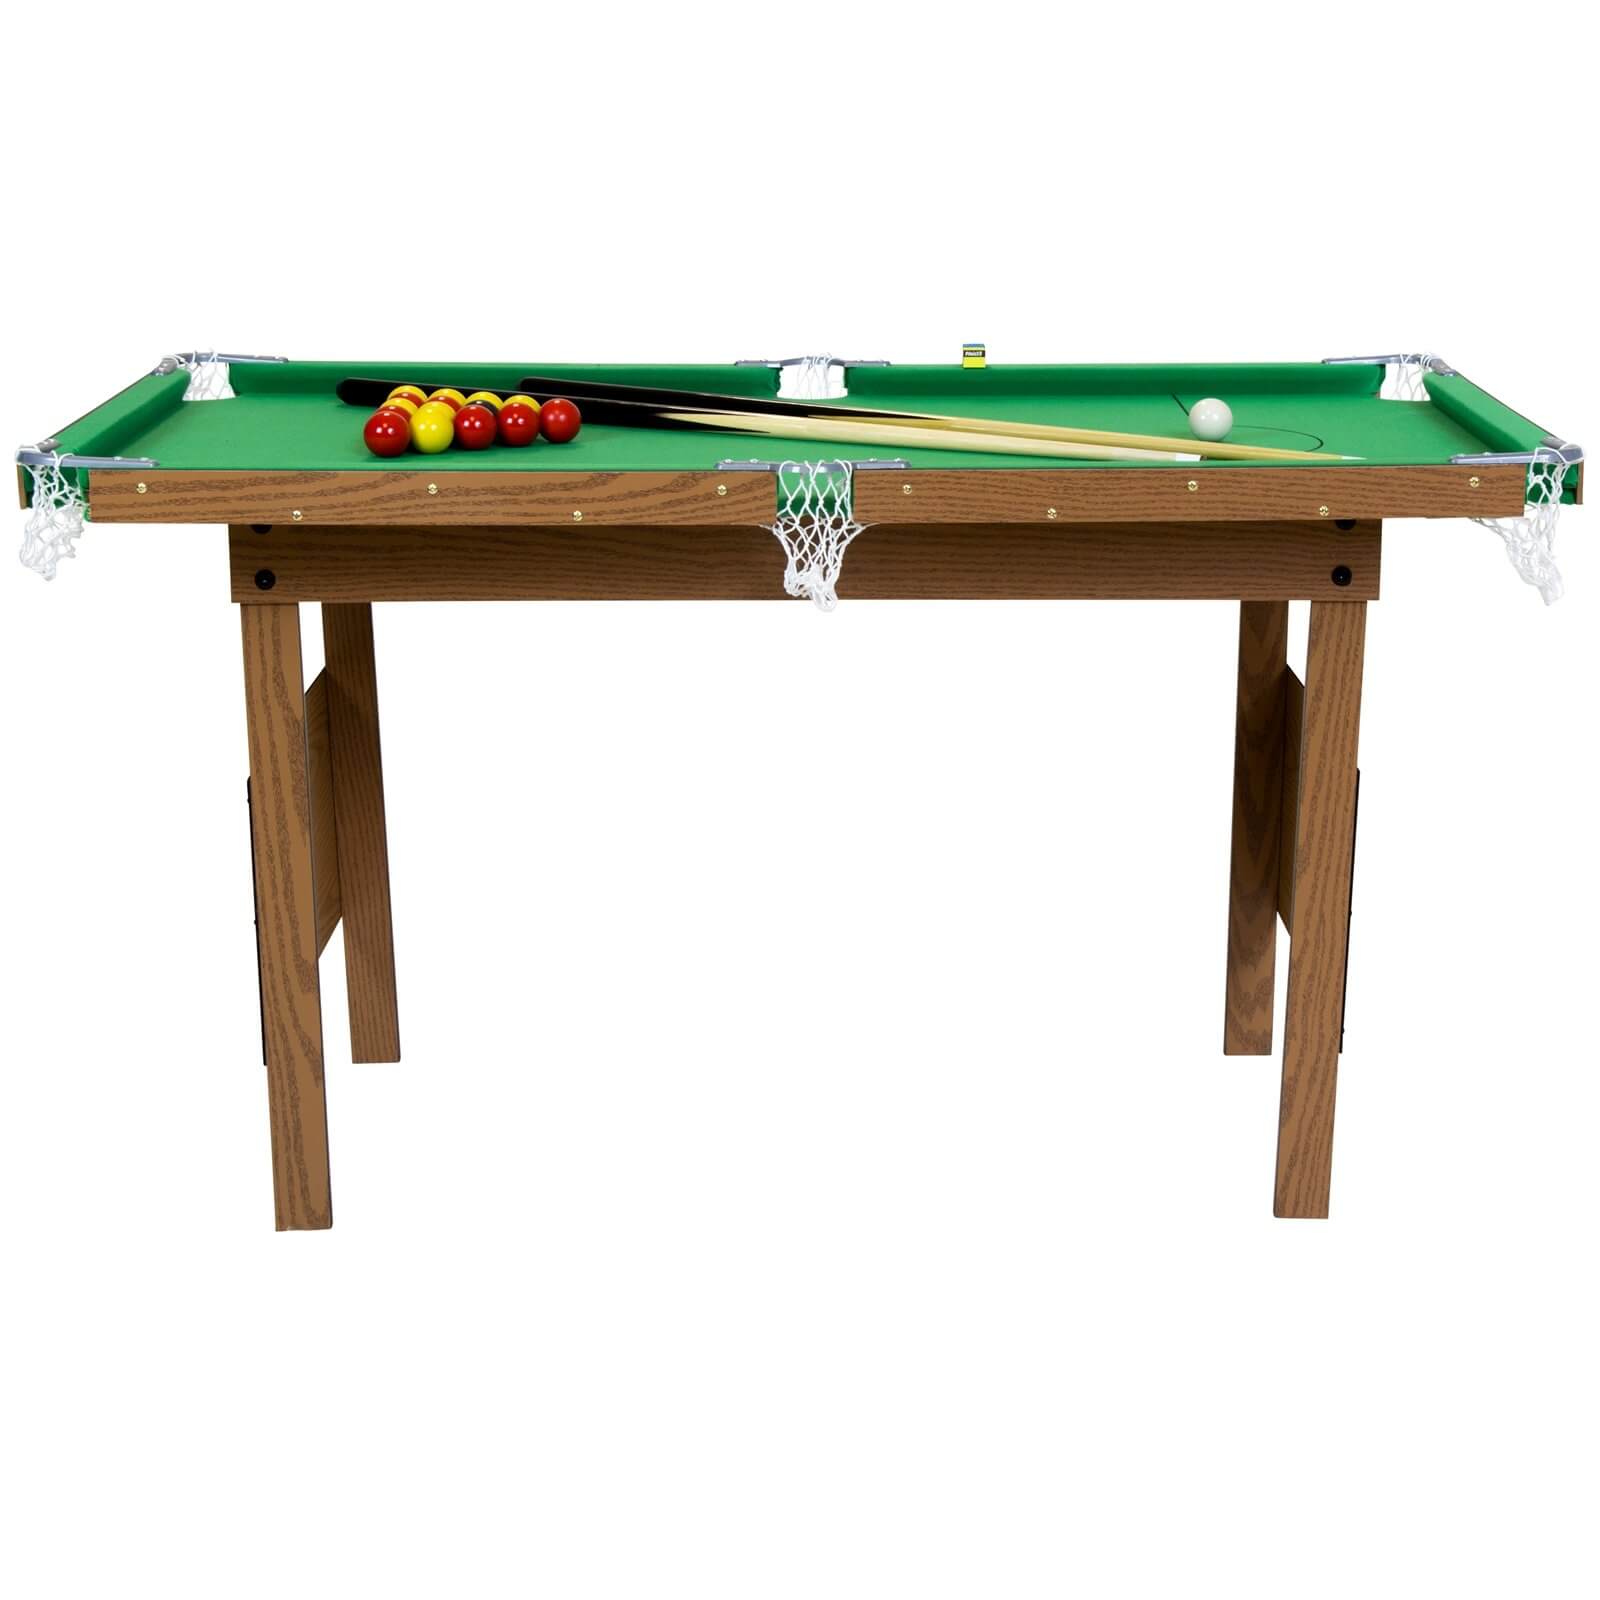 JUNIOR 4FT SNOOKER/POOL TABLE GREEN